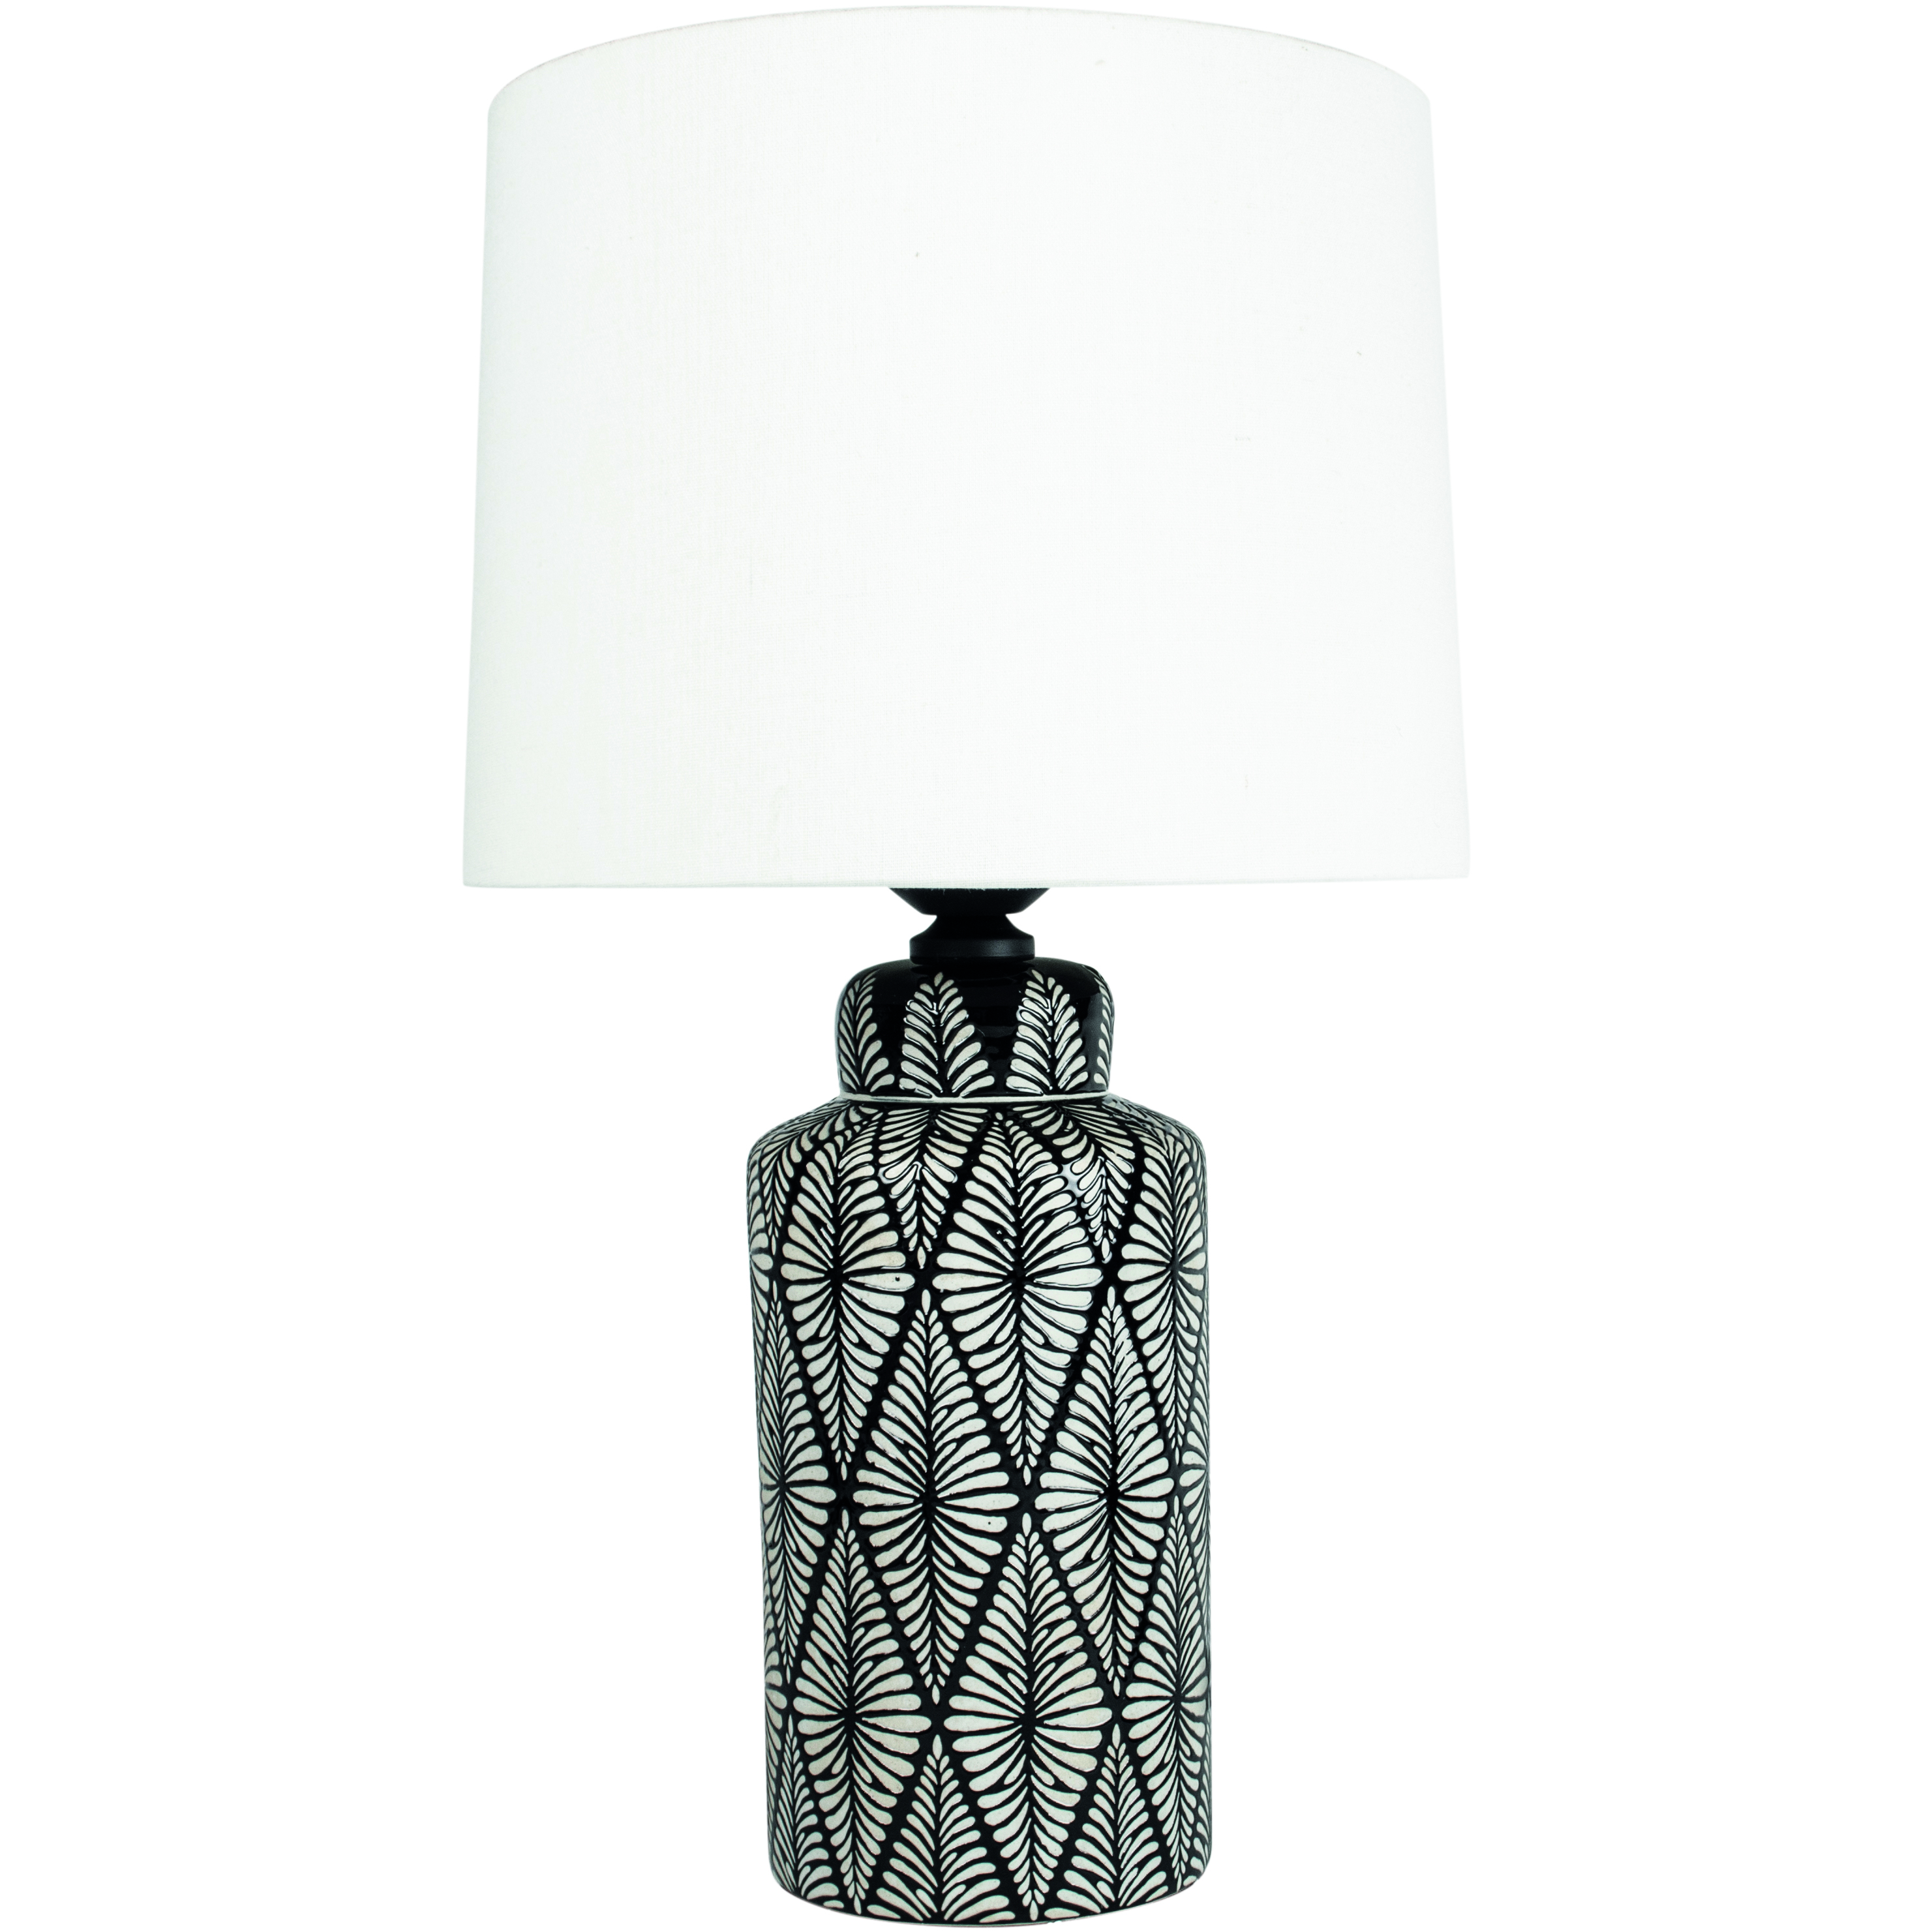 Grand Illusions Lamp Indochine Noir With Ivory Shade